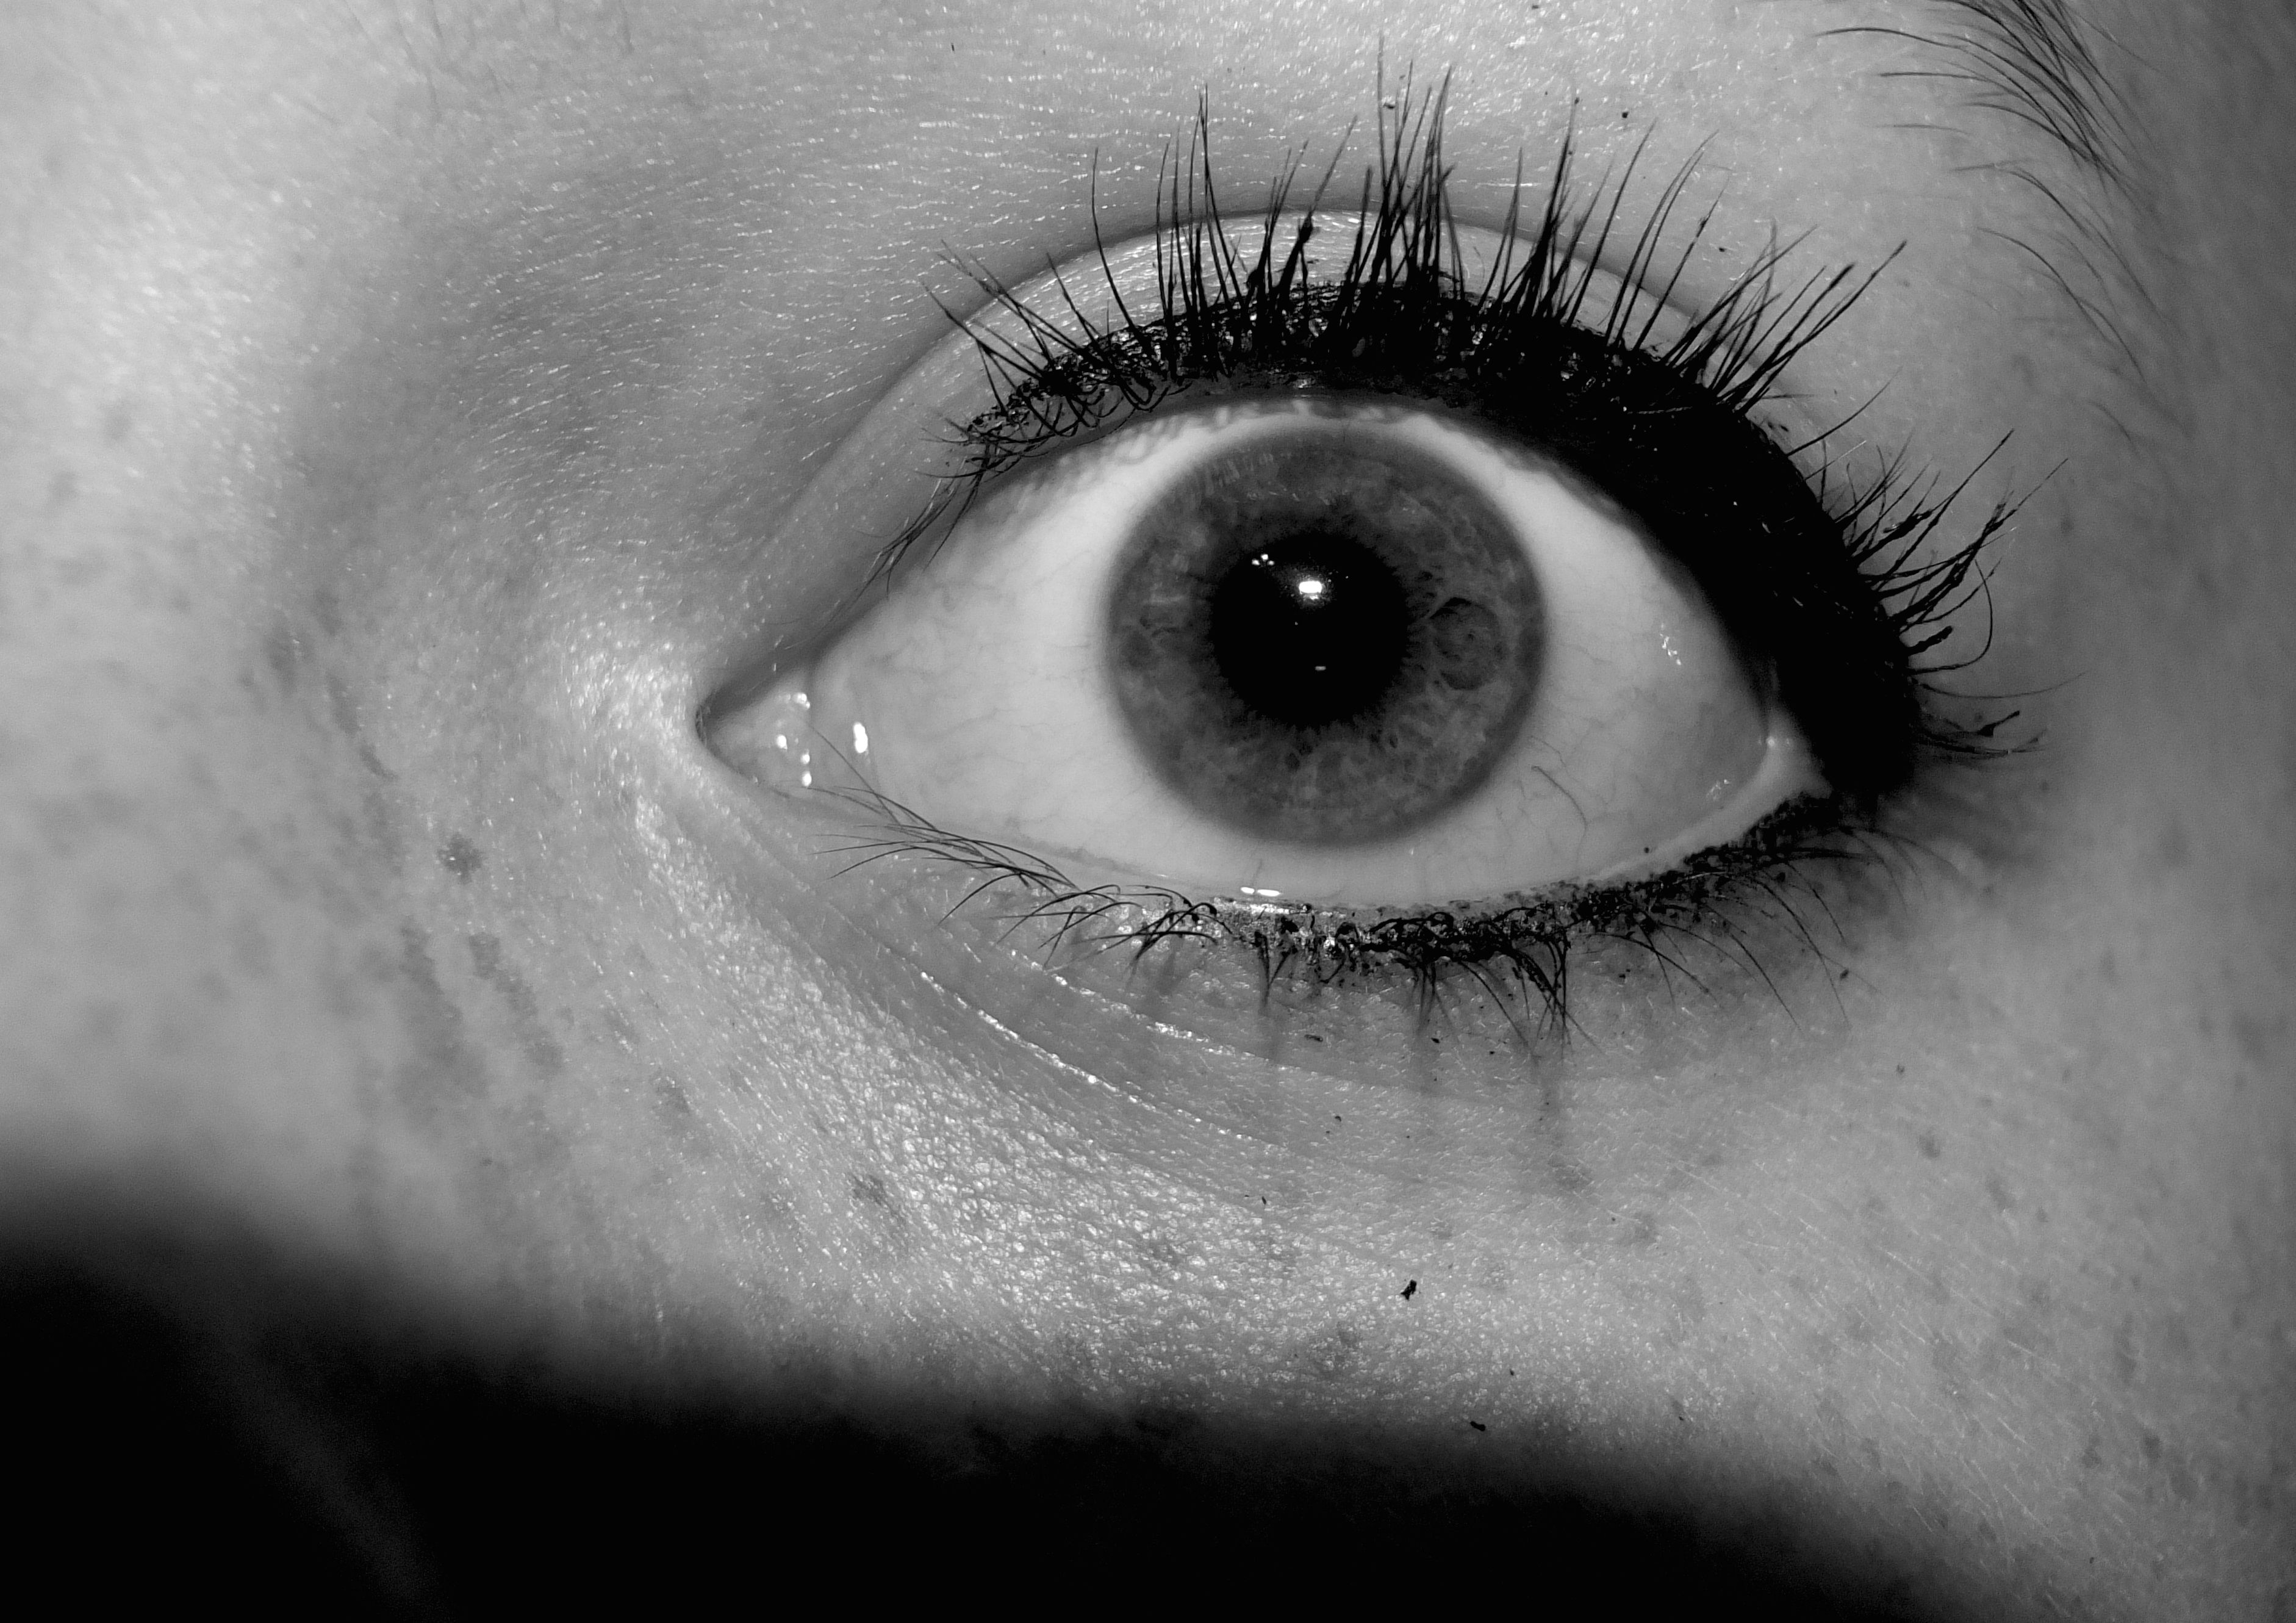 Close-up black and white photo of an eye with pale skin and freckles | The iris is dark and large with a tiny light